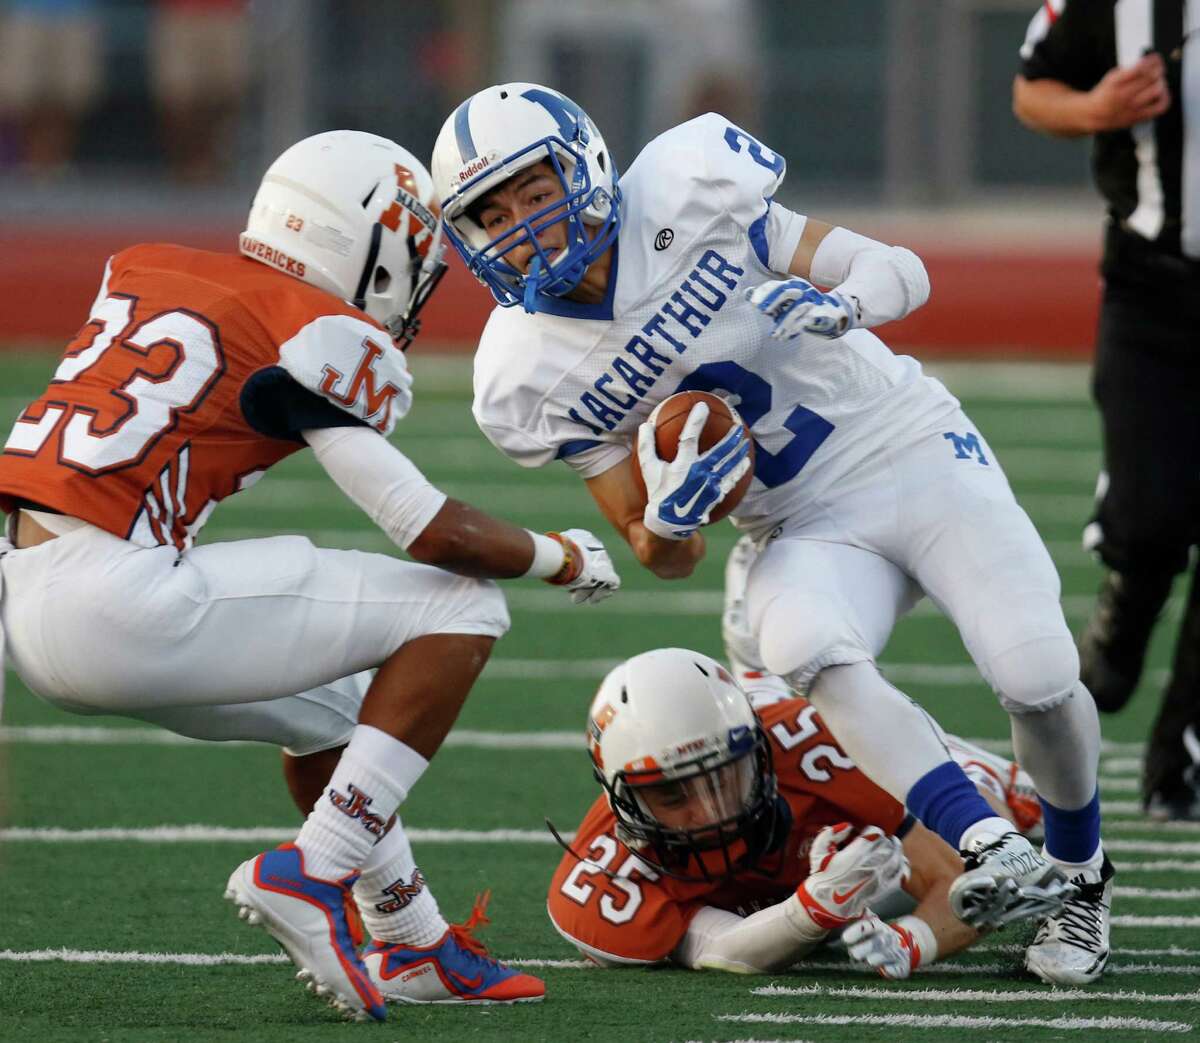 MacArthur's Nate Vega tries to elude the tackle of Madison's Brandon O'Connor and on left is Dante Carheel in first quarter. District 26-6A high school football game between MacArthur and Madison at Comalander Stadium on Saturday, September 26,2015